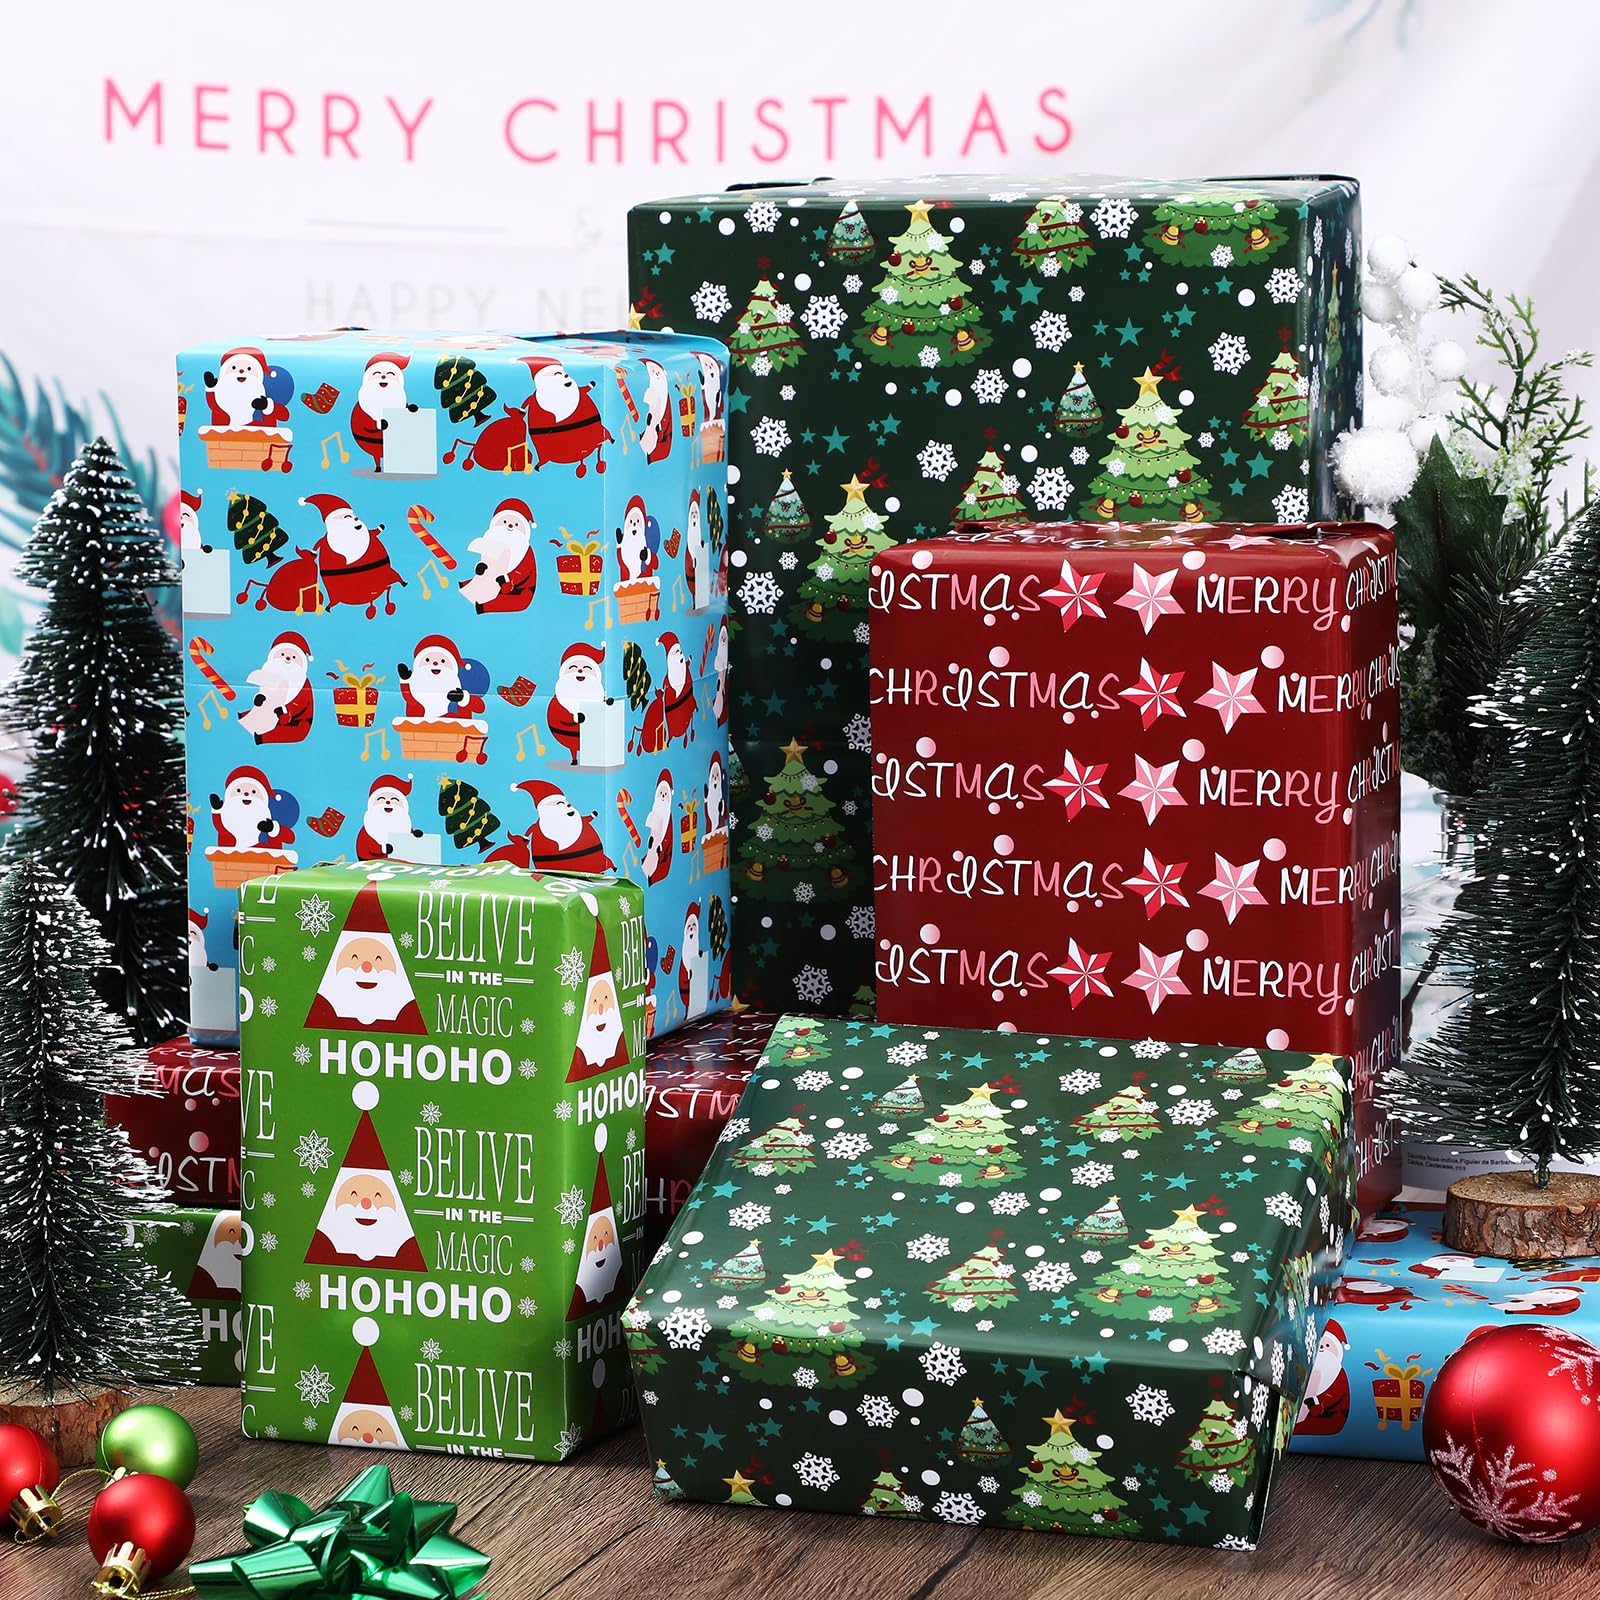 PlandRichW Christmas Wrapping Paper 12 Sheets Folded for Kids Boys Girls Men Women Gifts. Green,Red and Blue, Christmas Tree, Greetings, Santa, Gift and Snowflakes, 20 X 29 Inches Each